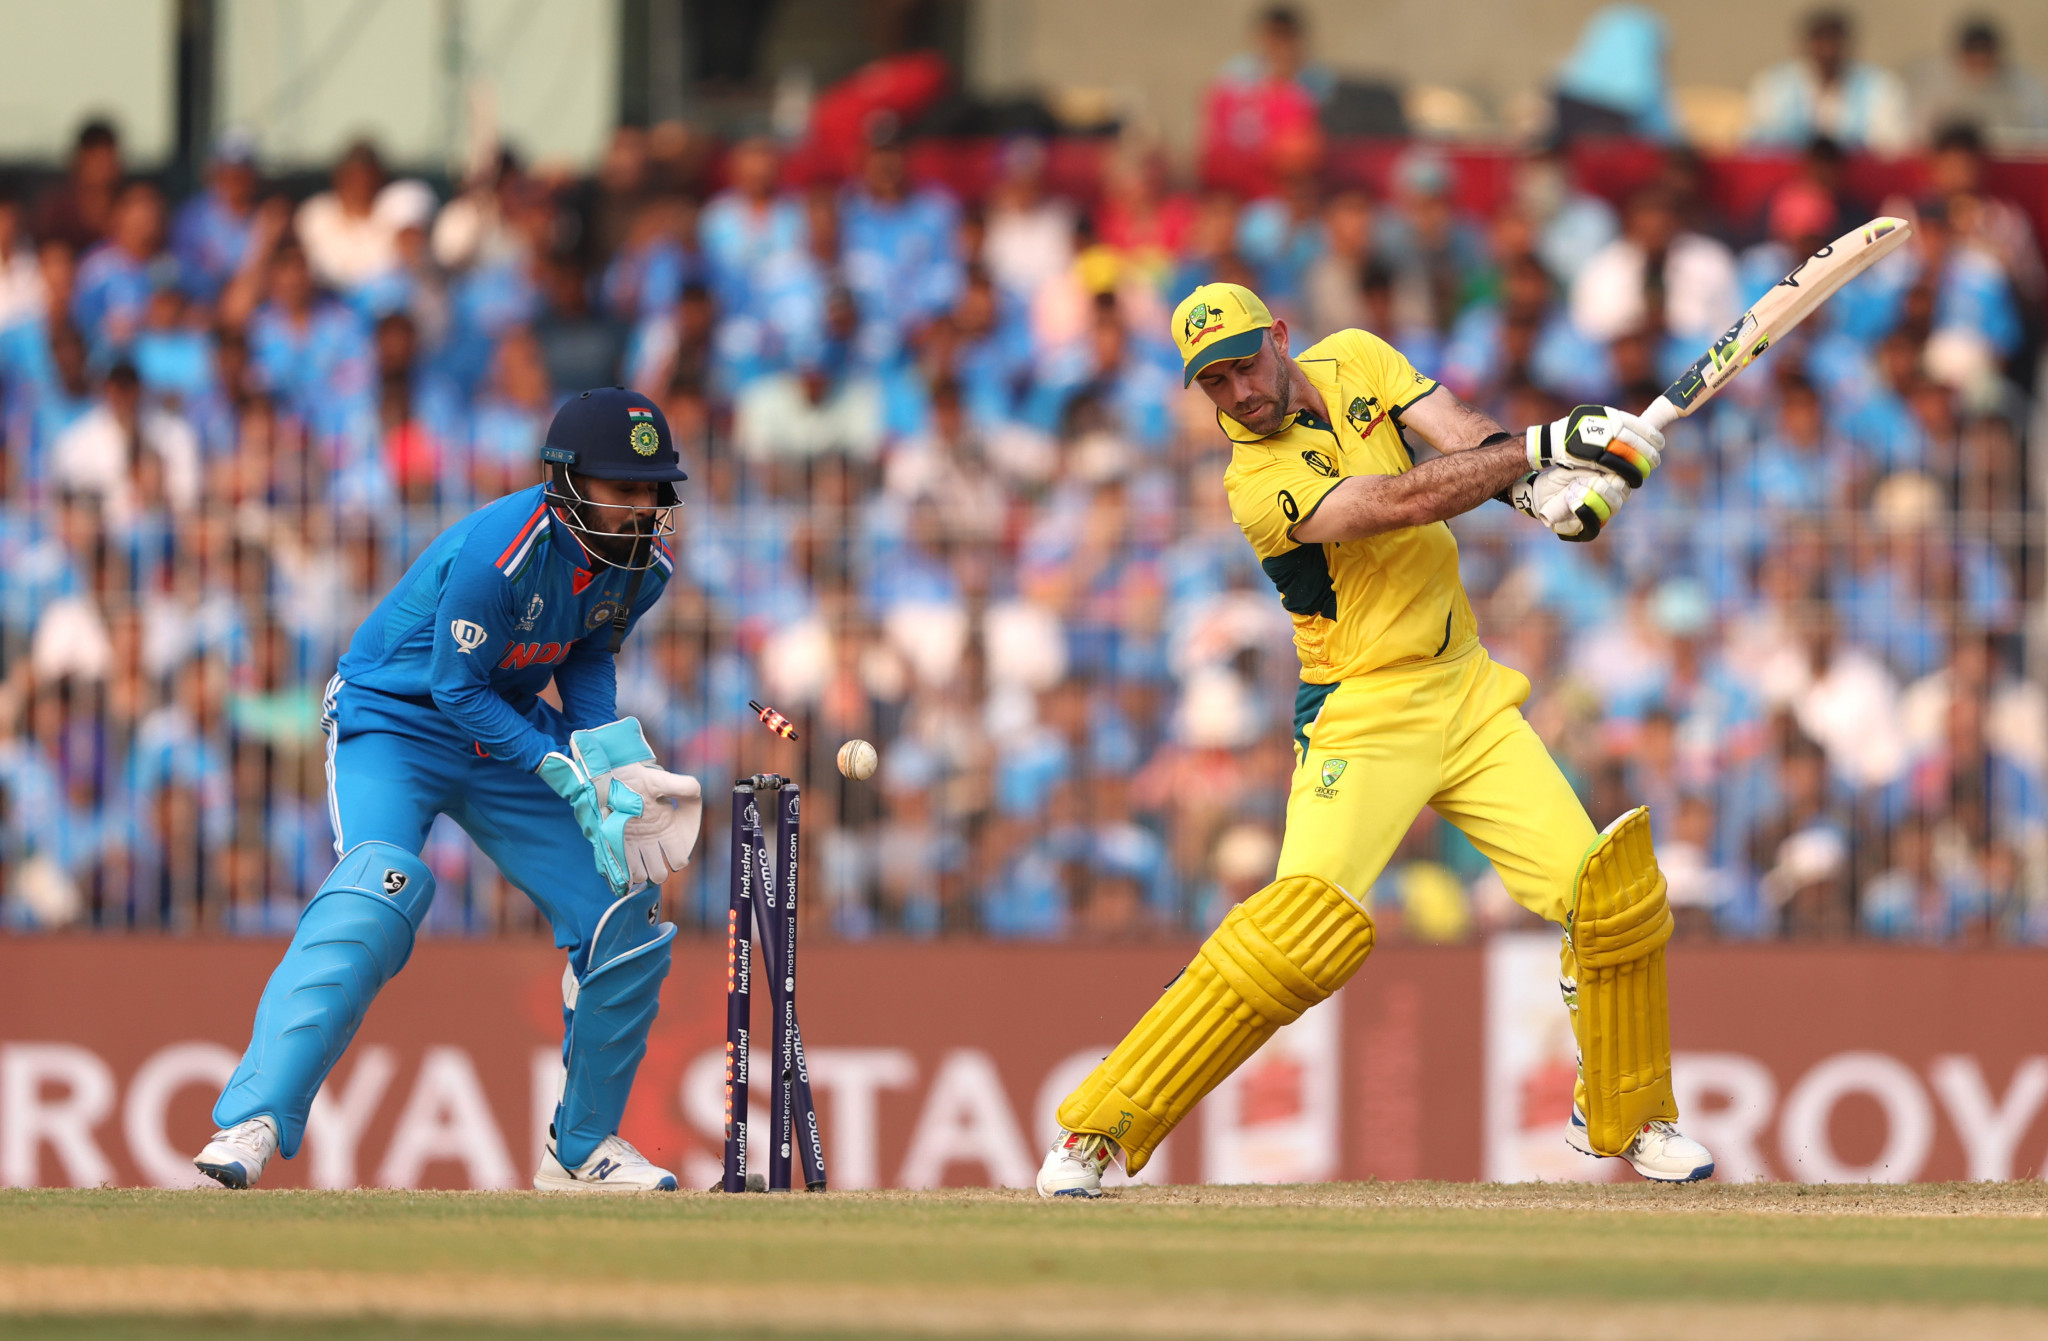 The decision on the proposed new sports is set to be ratified at the IOC Session, being held in India, which is currently staging the ICC Men's Cricket World Cup ©Getty Images